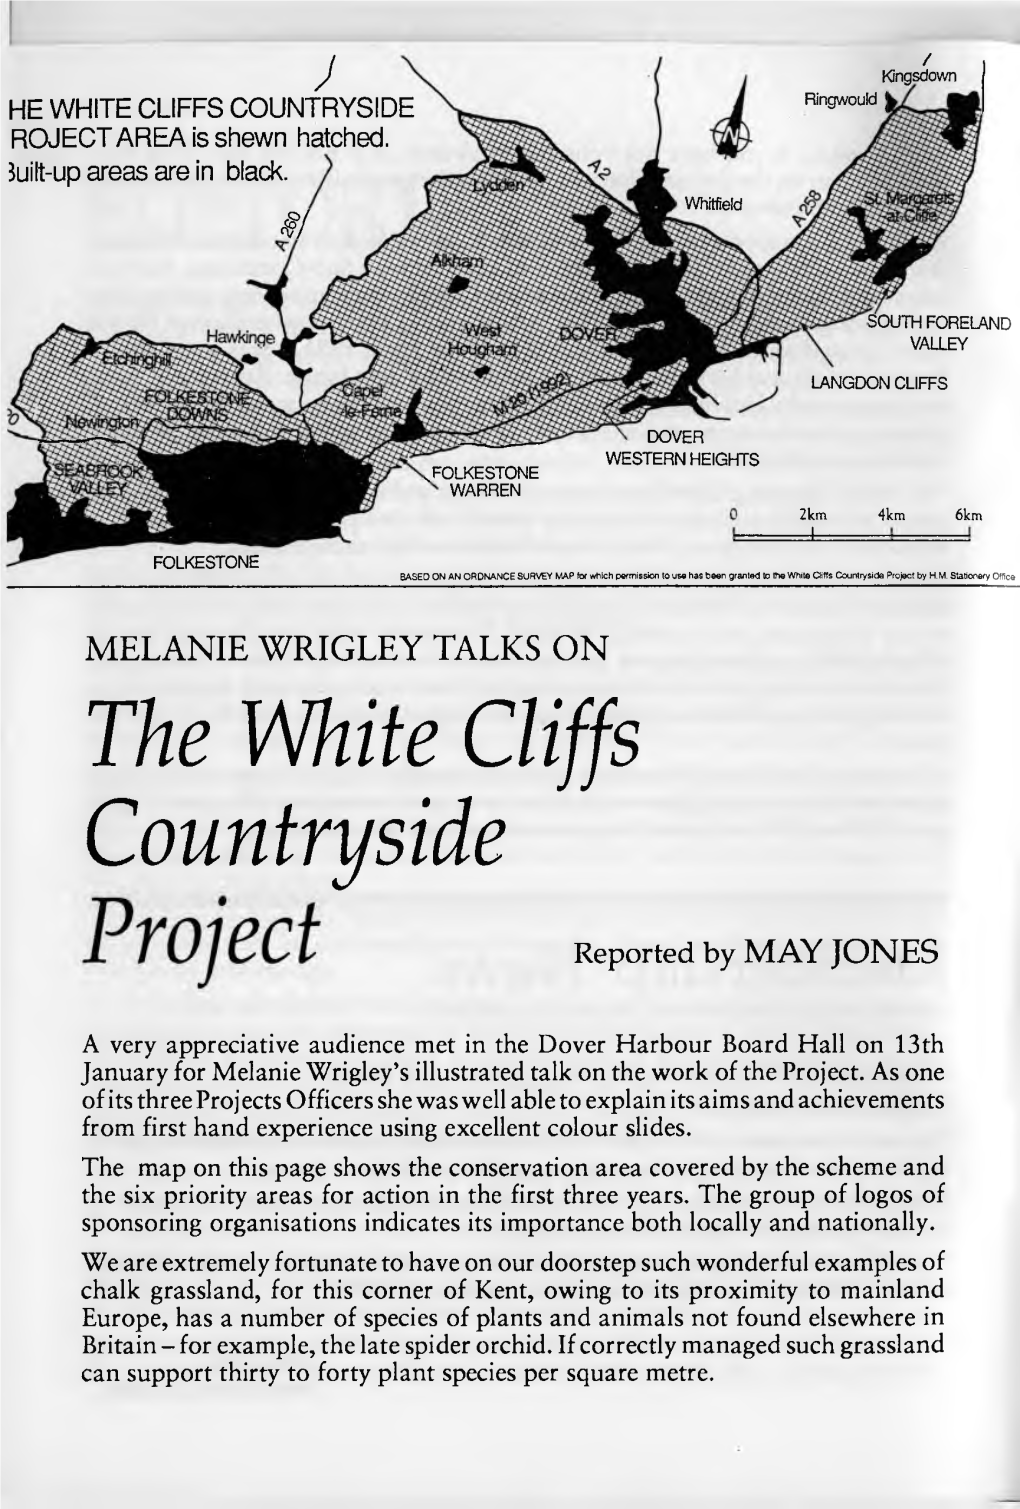 The White Cliffs Countryside Project by H.M